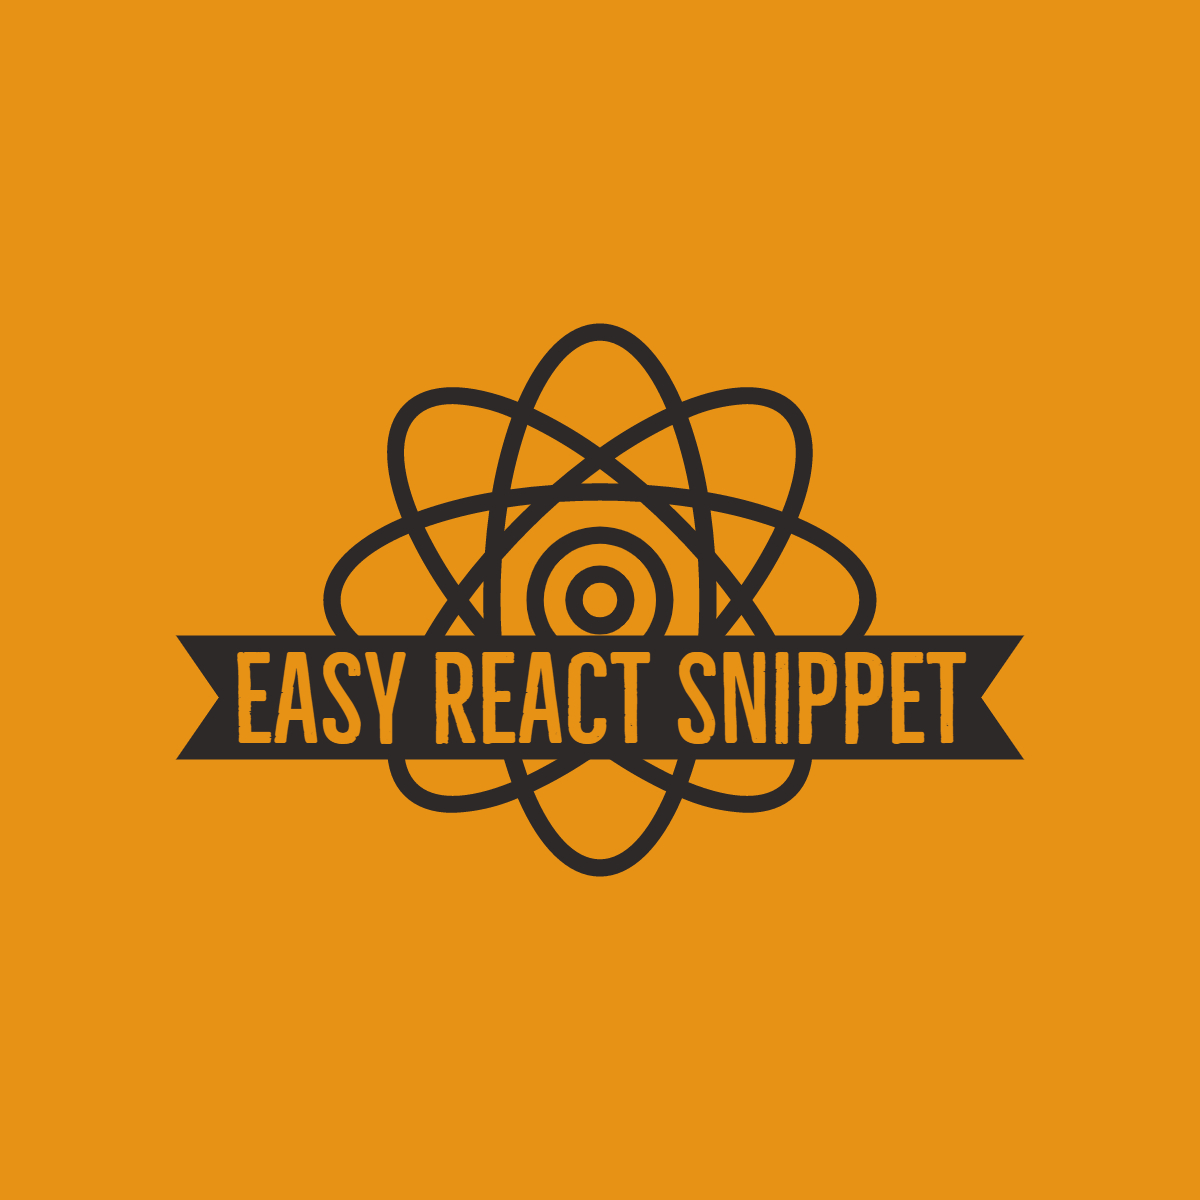 Easy React Snippet